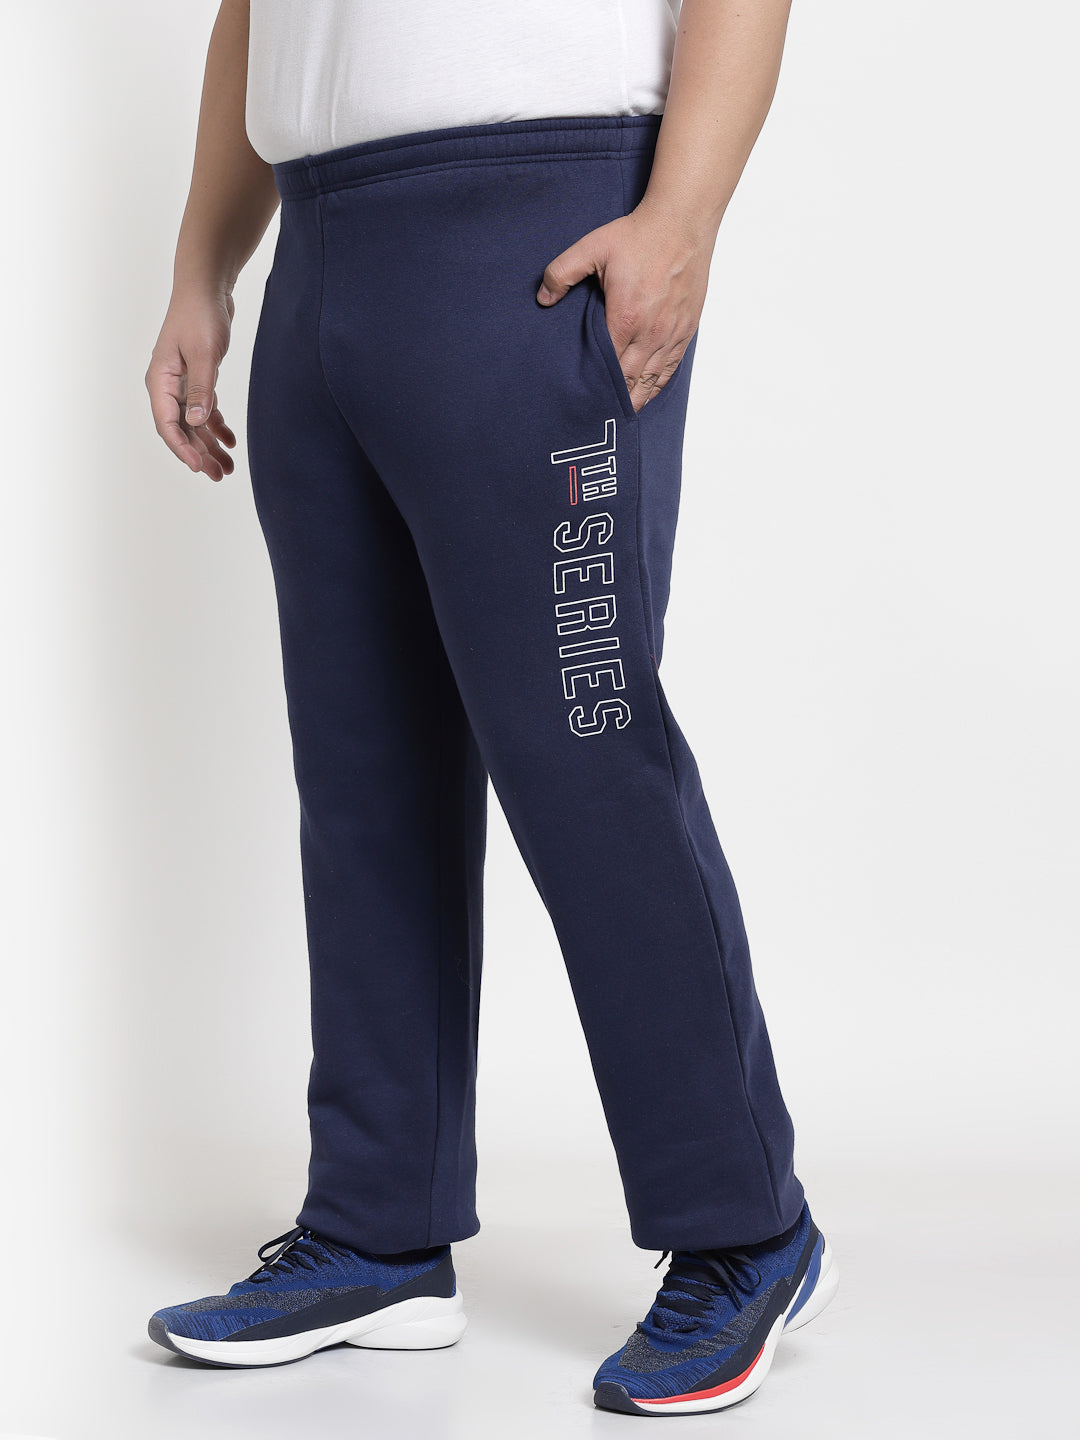 Classic Polyester Spandex Solid Track Pants For Men at Rs 922 | Tiruppur|  ID: 2850429164662